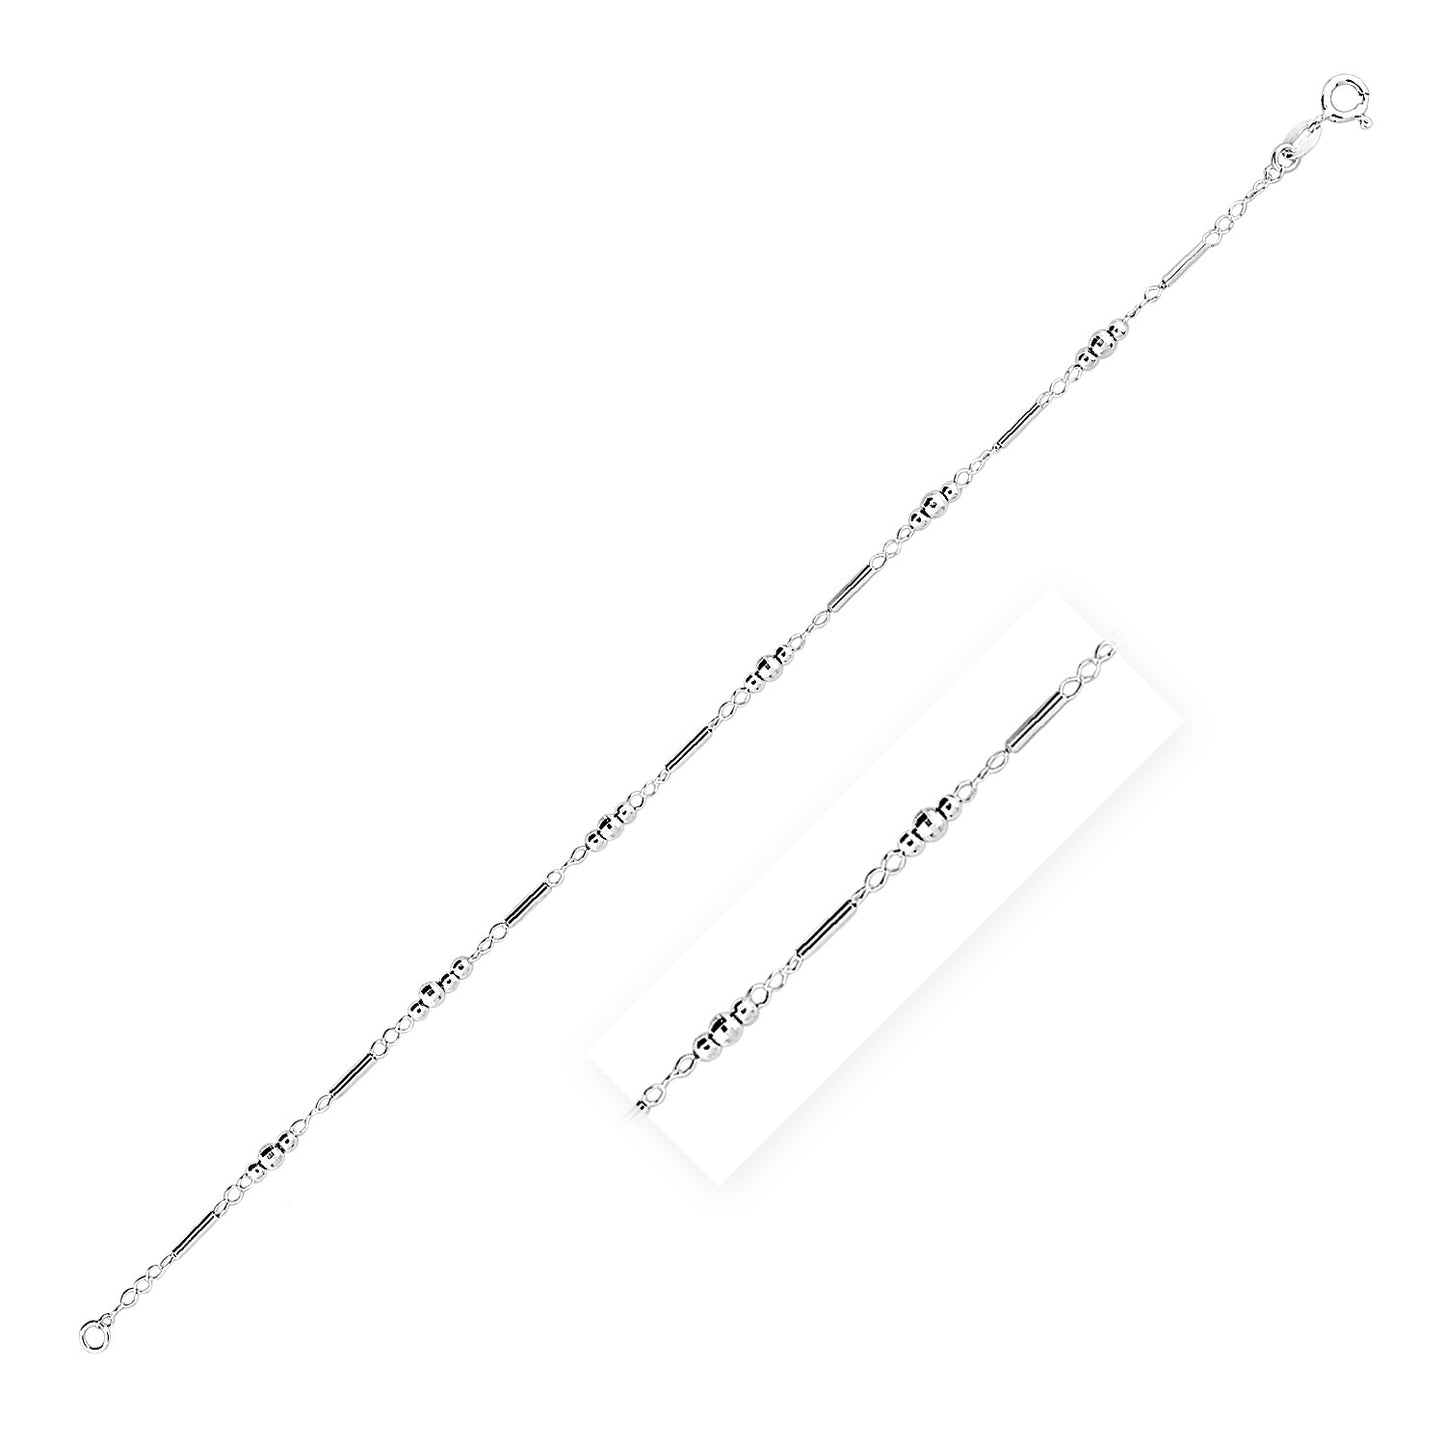 Sterling Silver Anklet with Polished Bars and Beads